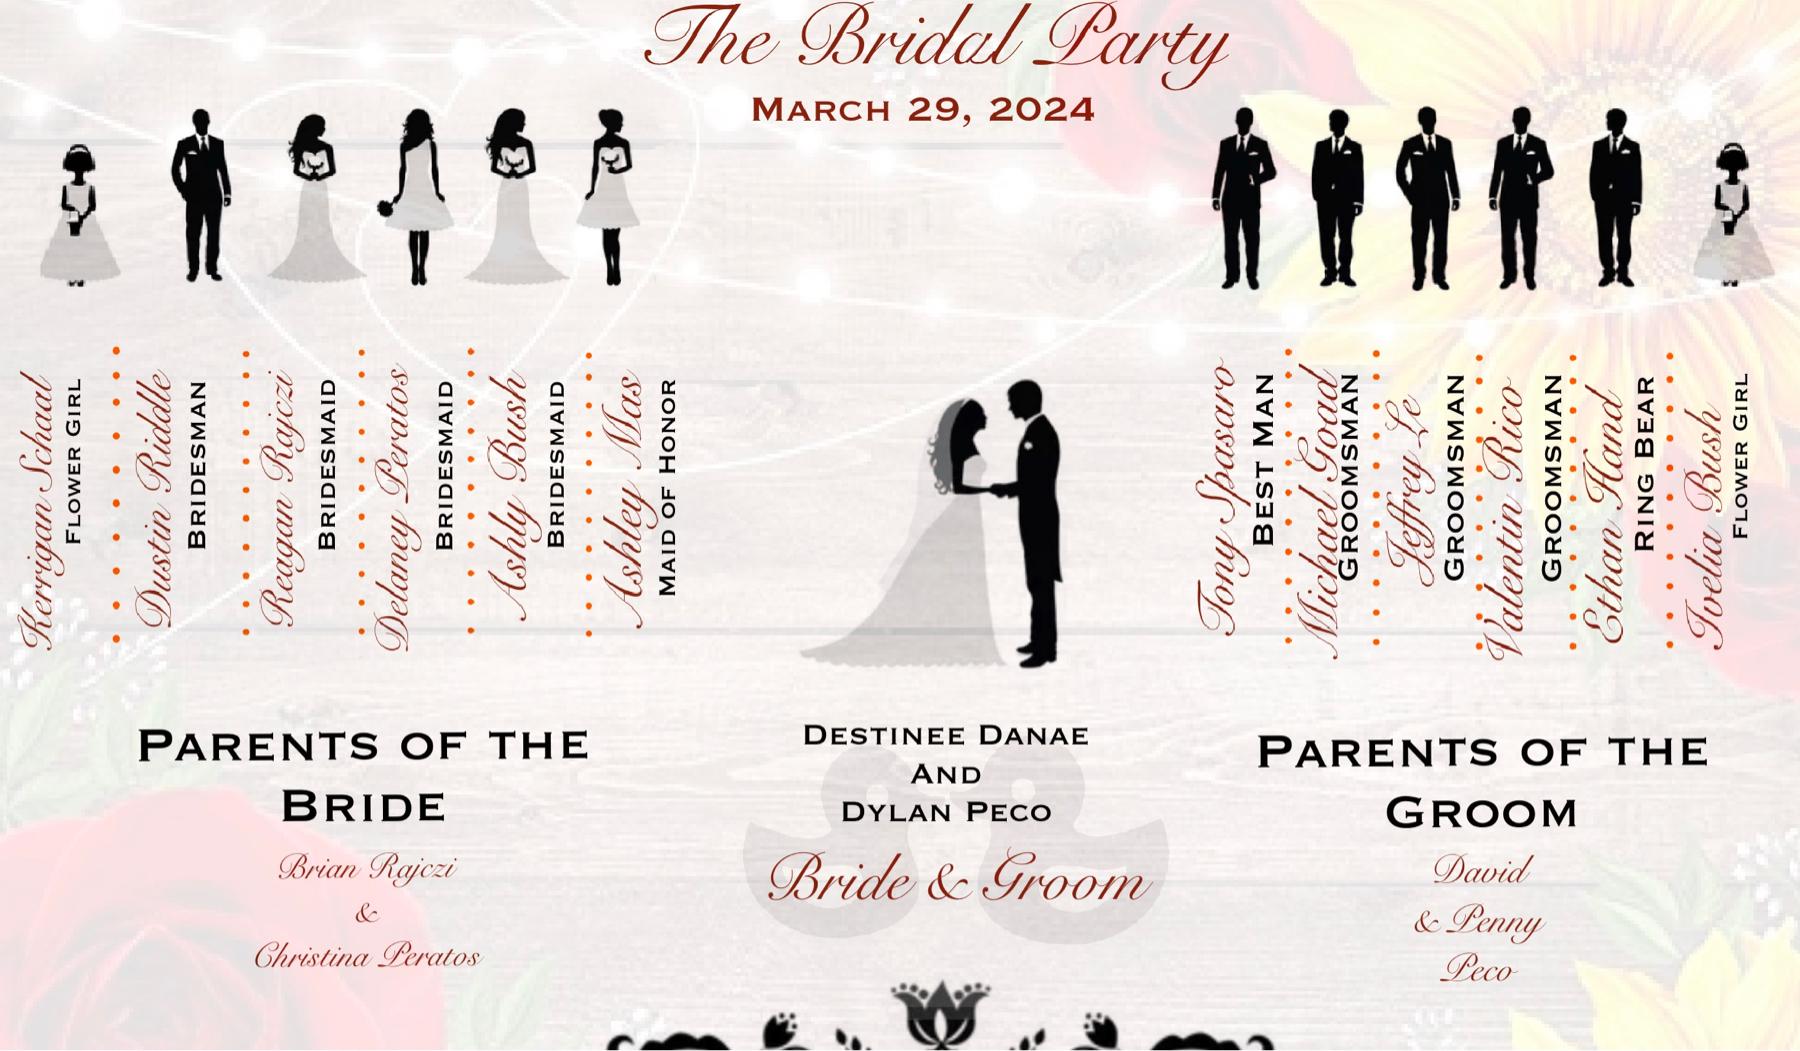 The Wedding Website of Destinee Danae and Dylan Peco